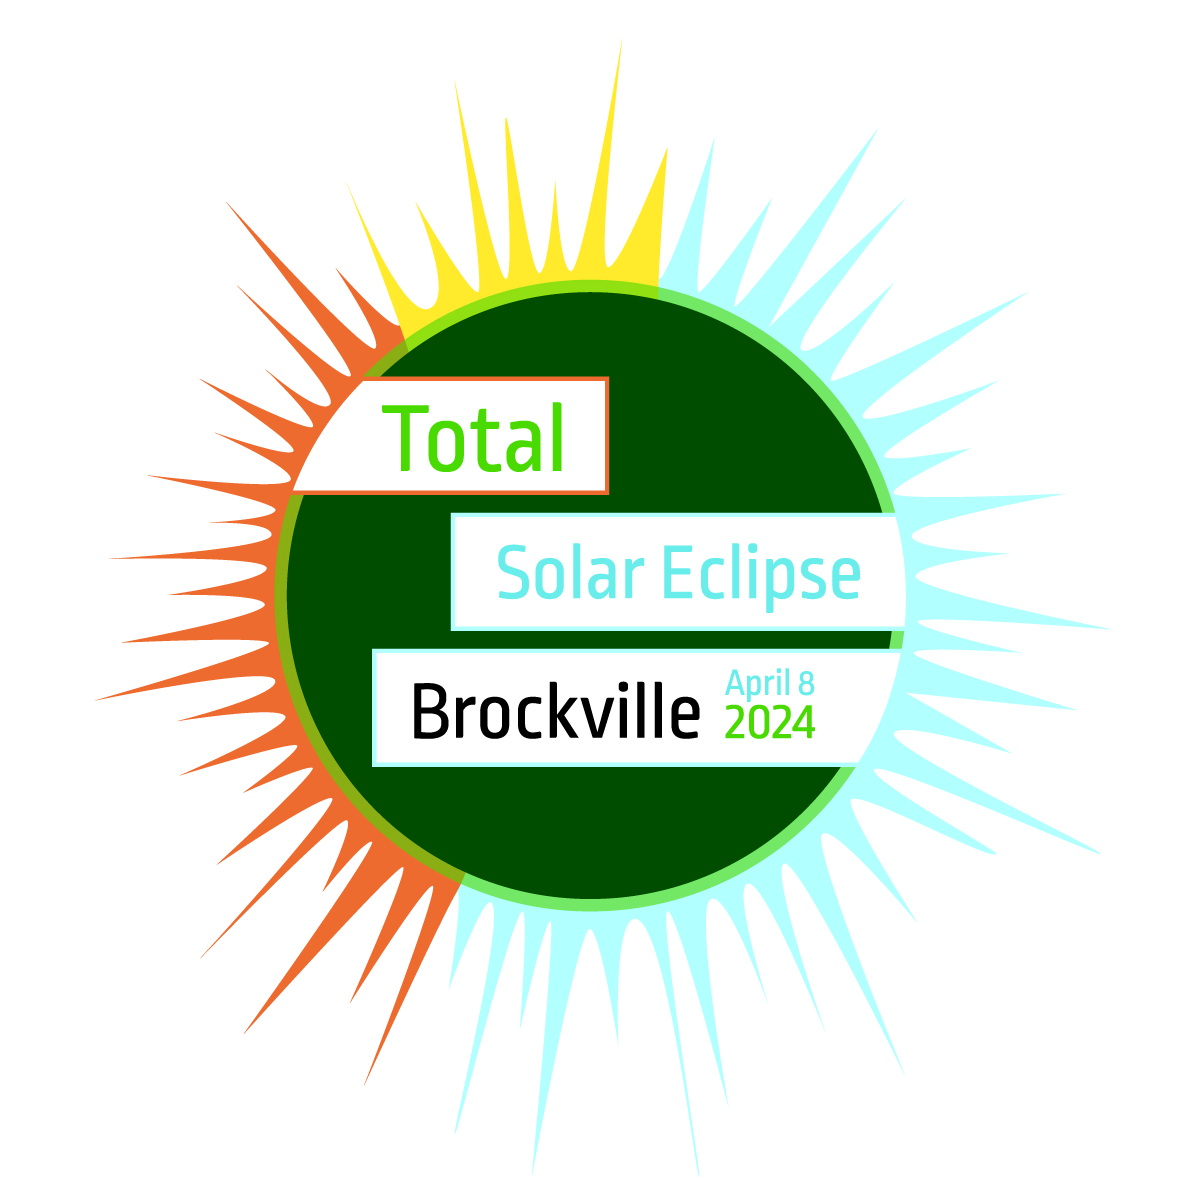 Save the Date: Total Solar Eclipse in Brockville on April 8